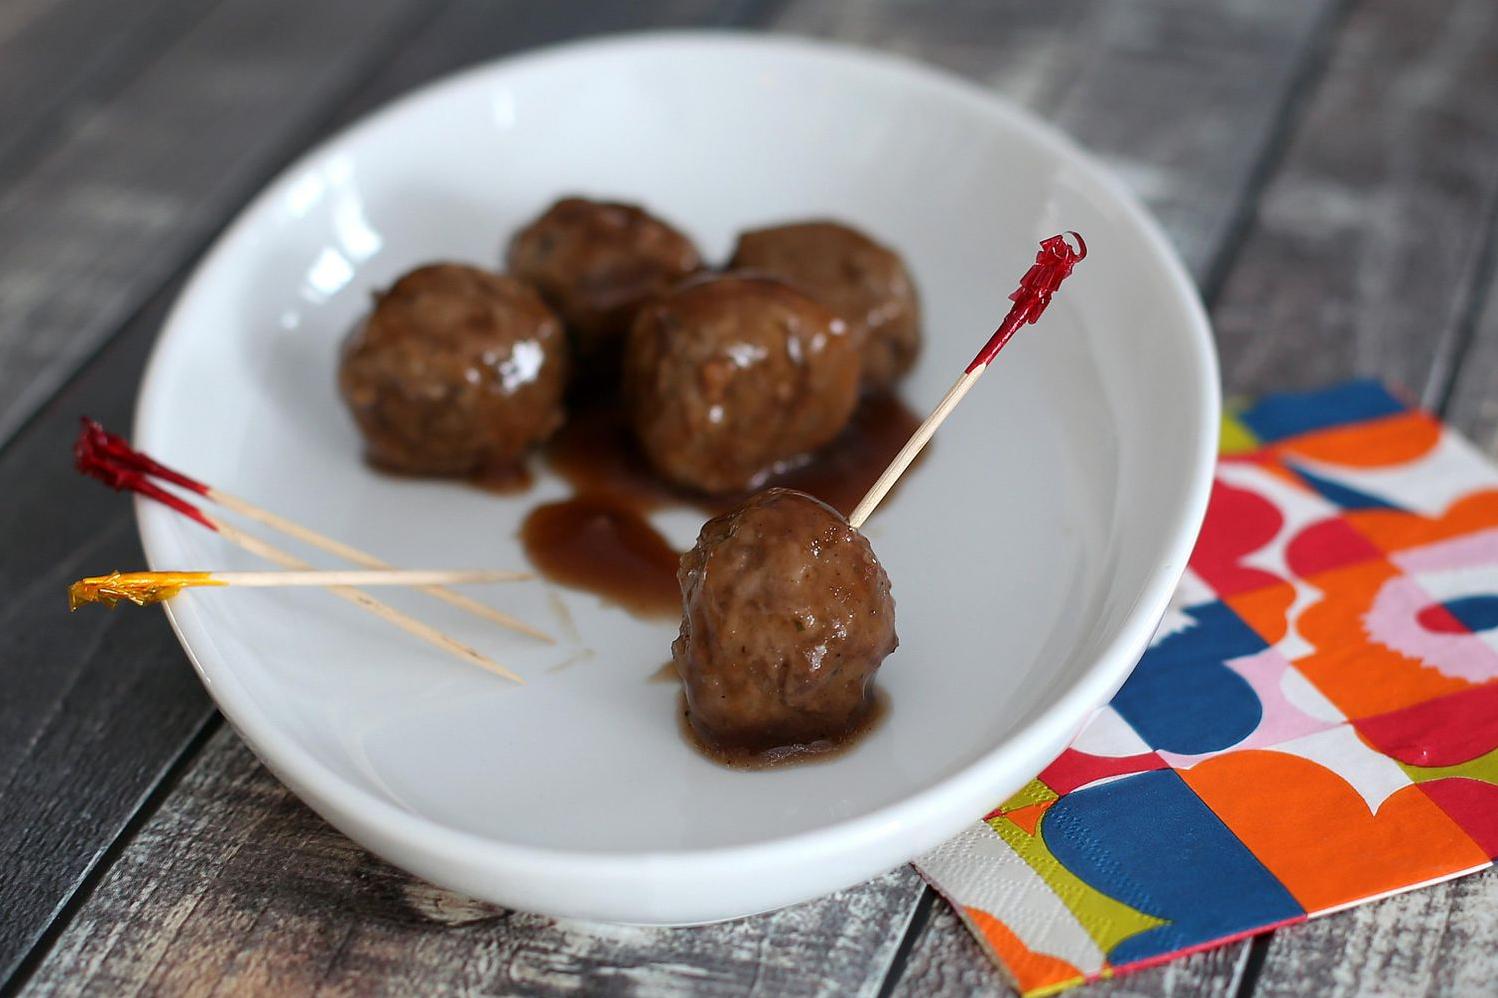  These meatballs in wine sauce will take your taste buds on a tantalizing trip.